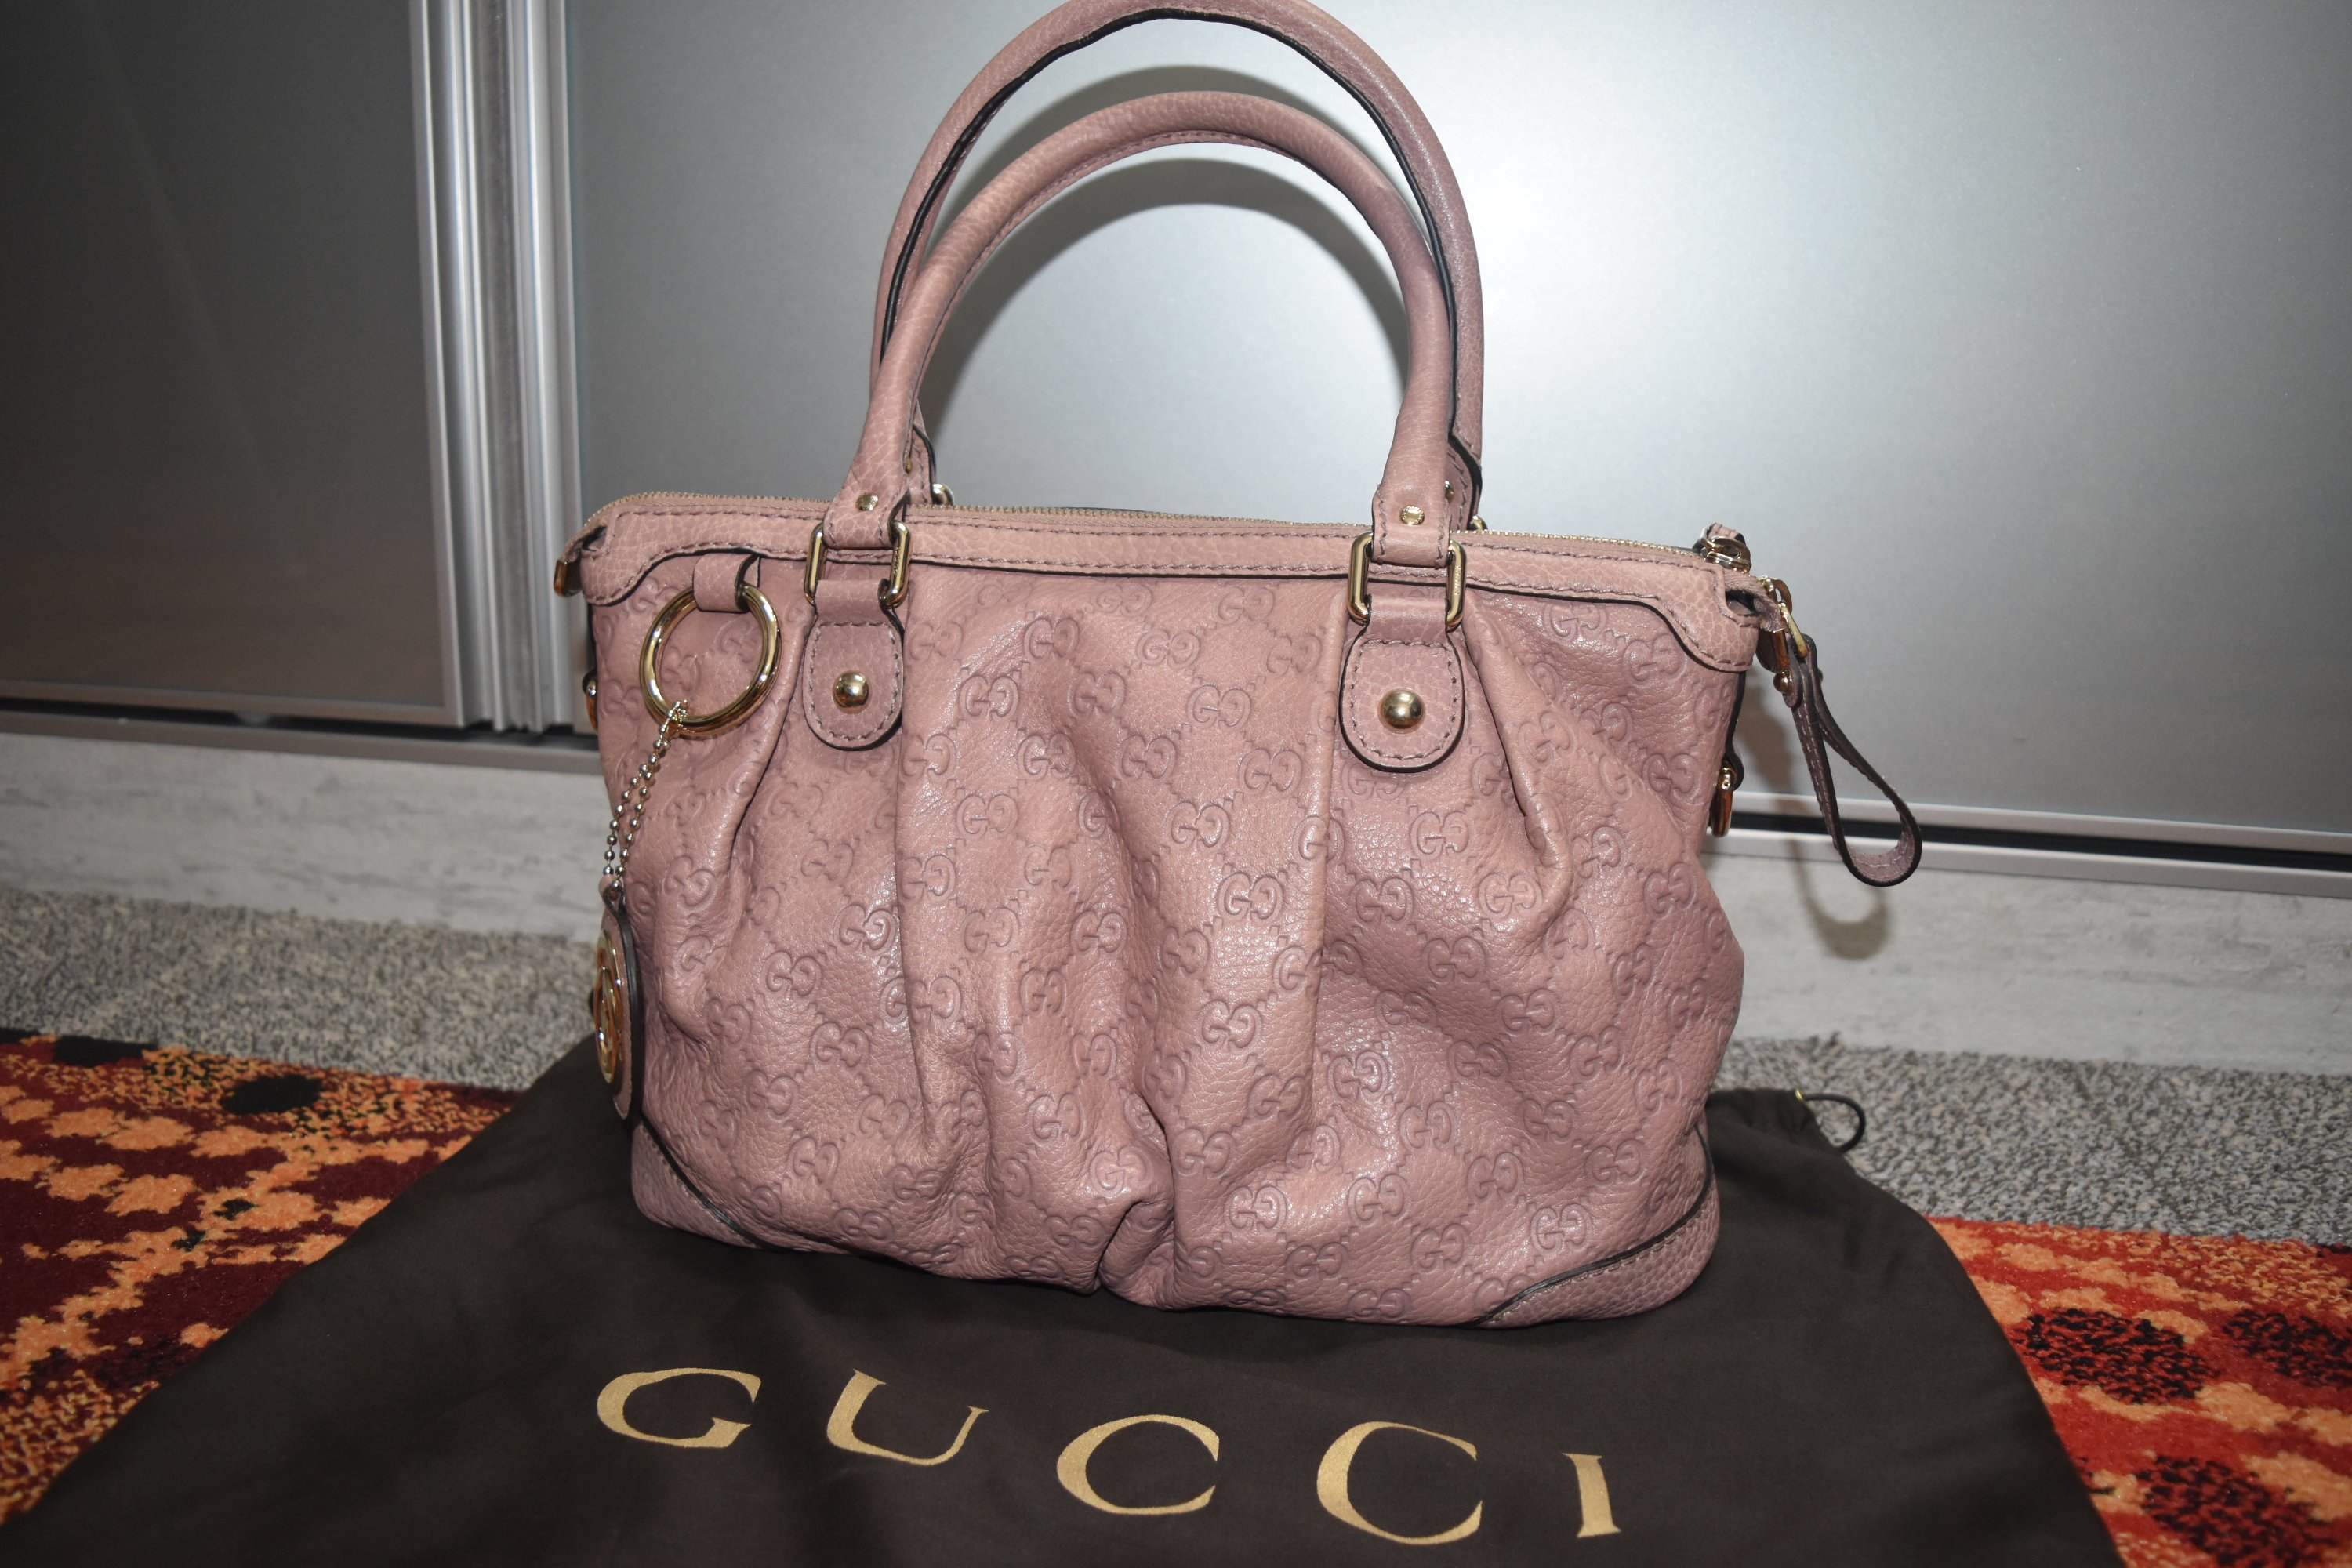 BN GUCCI FULL LEATHER BAG AT COST | SingaporeMotherhood Forum